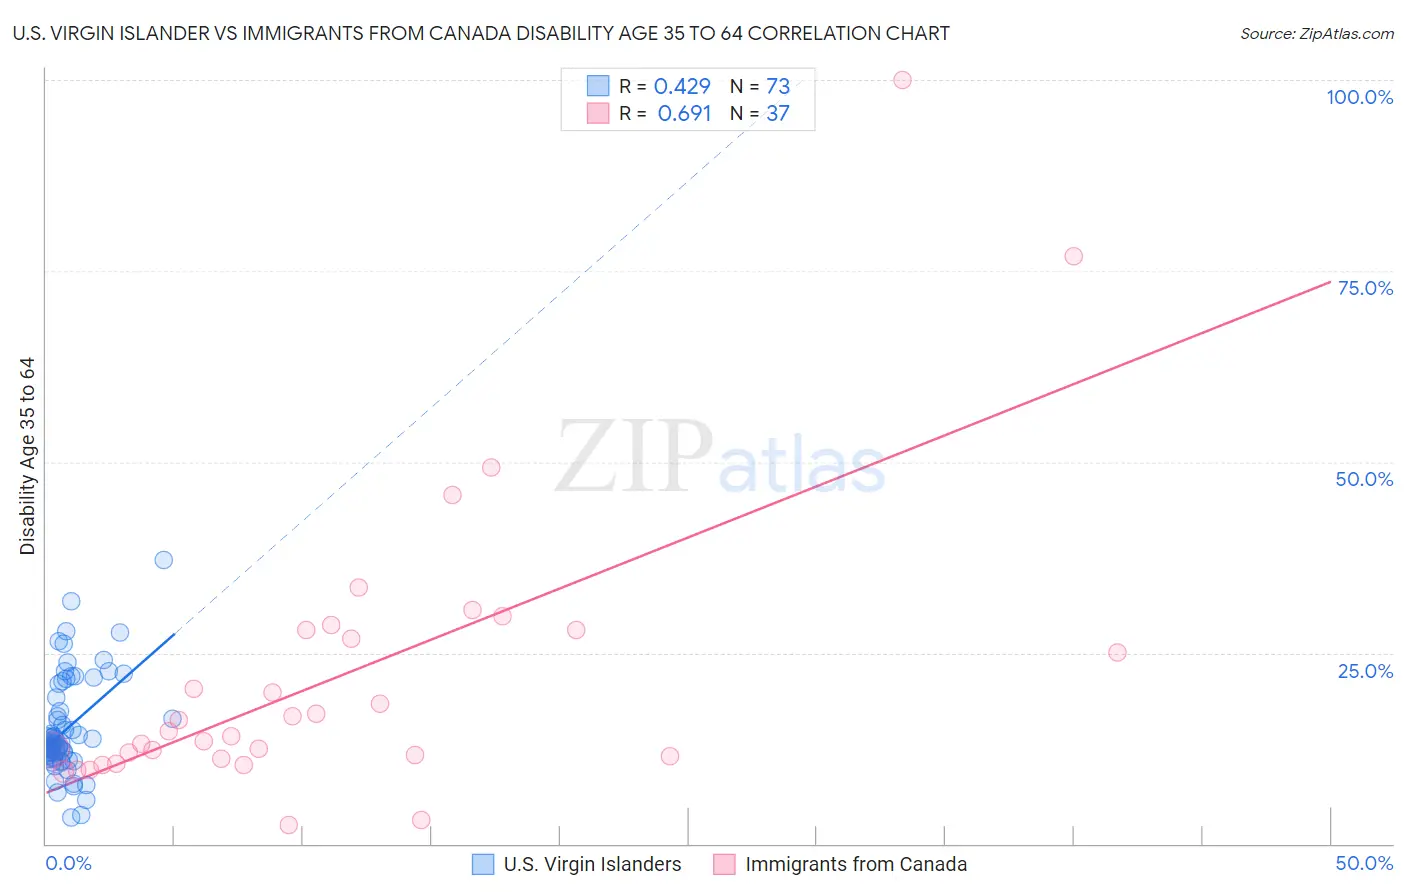 U.S. Virgin Islander vs Immigrants from Canada Disability Age 35 to 64